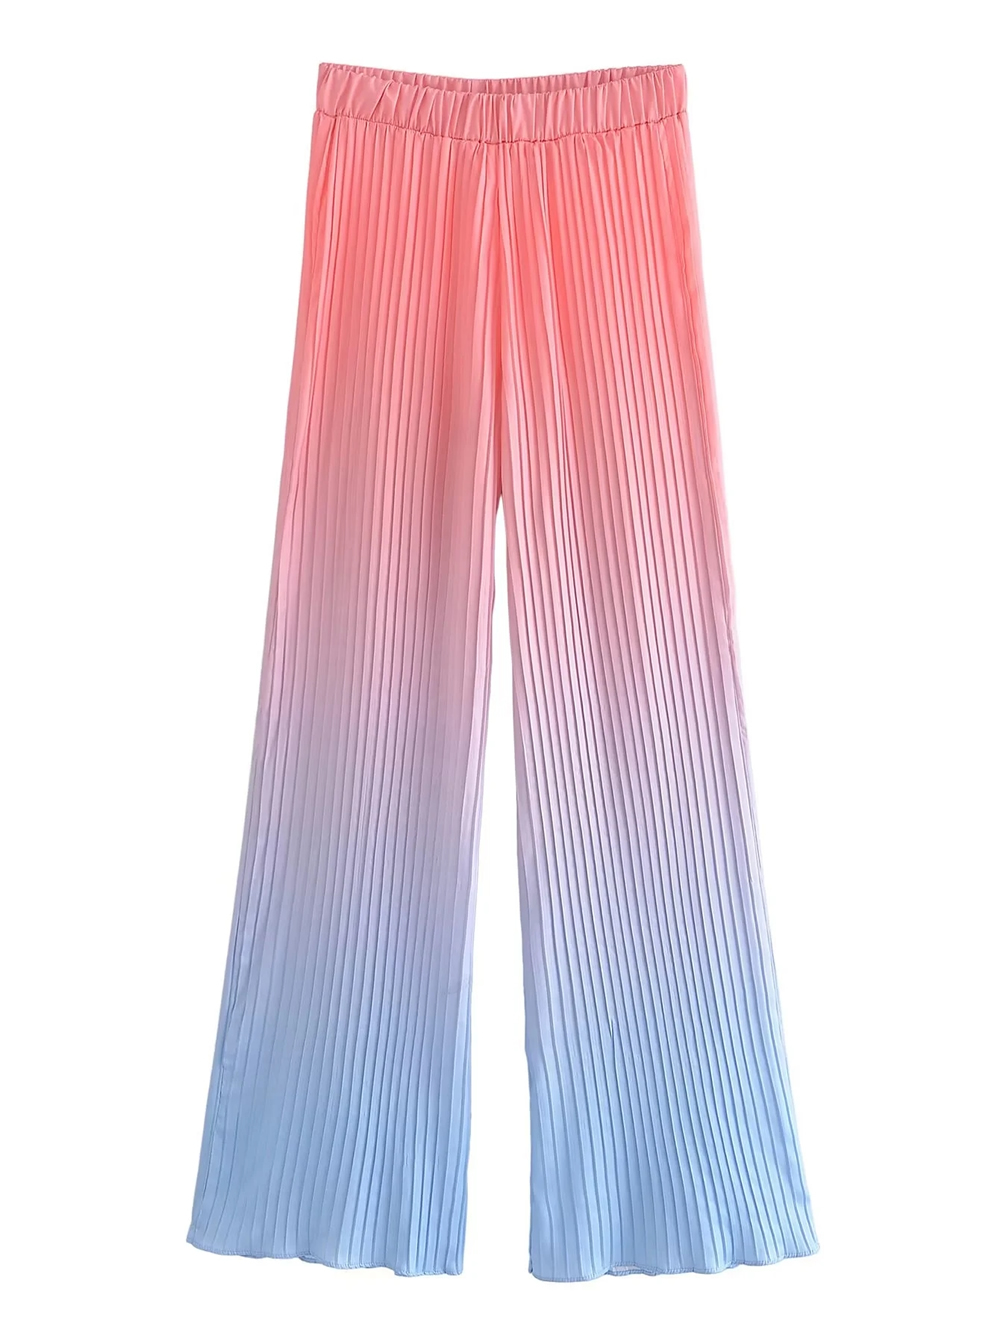 Fashion Color Gradient Pleated Satin Trousers,Pants